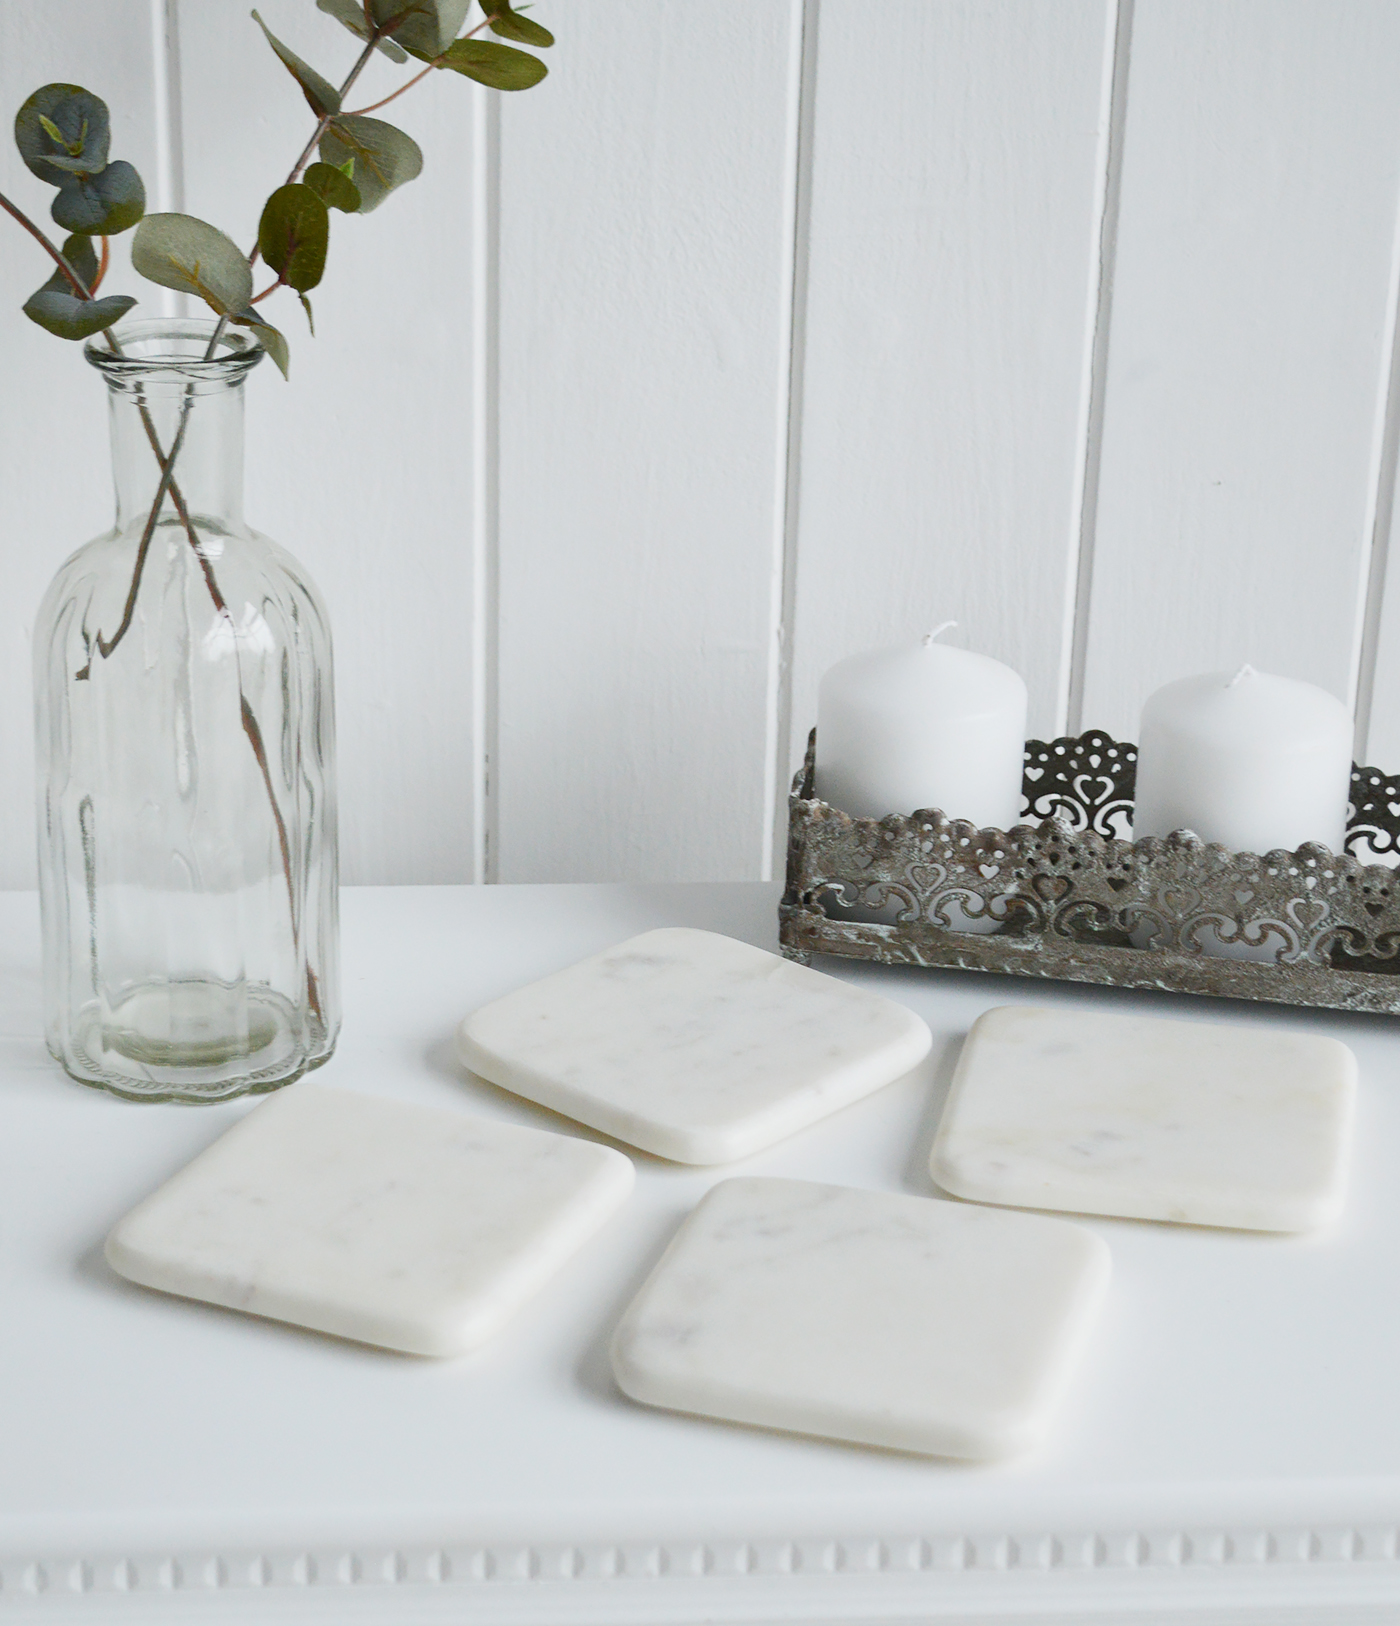 New England style home interiors from The White Lighthouse Furniture - White Marble Coaster